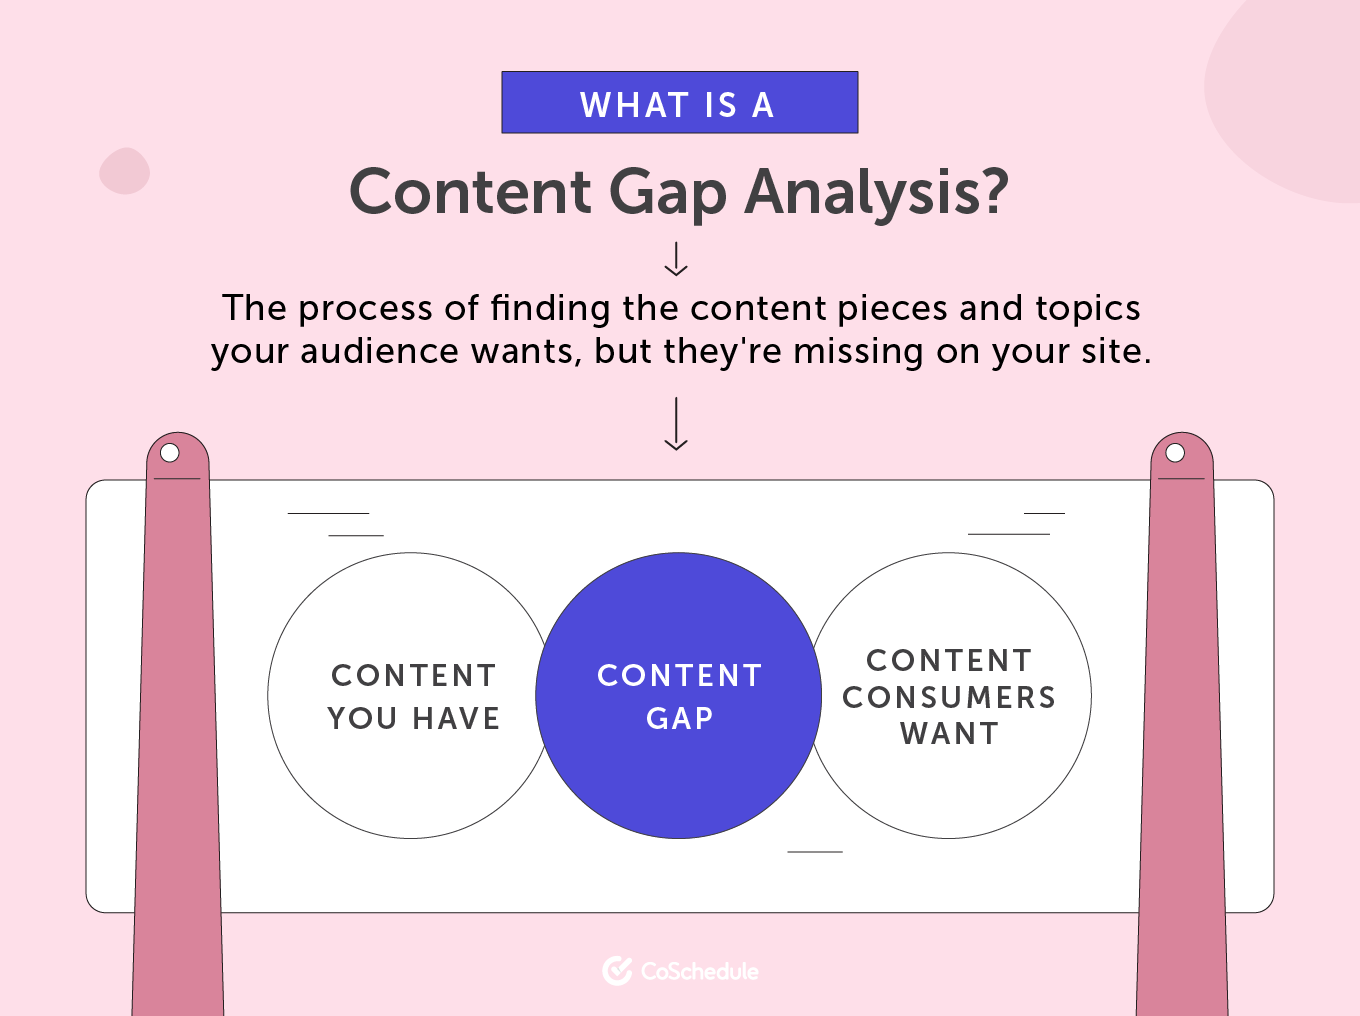 what is a content gap analysis?